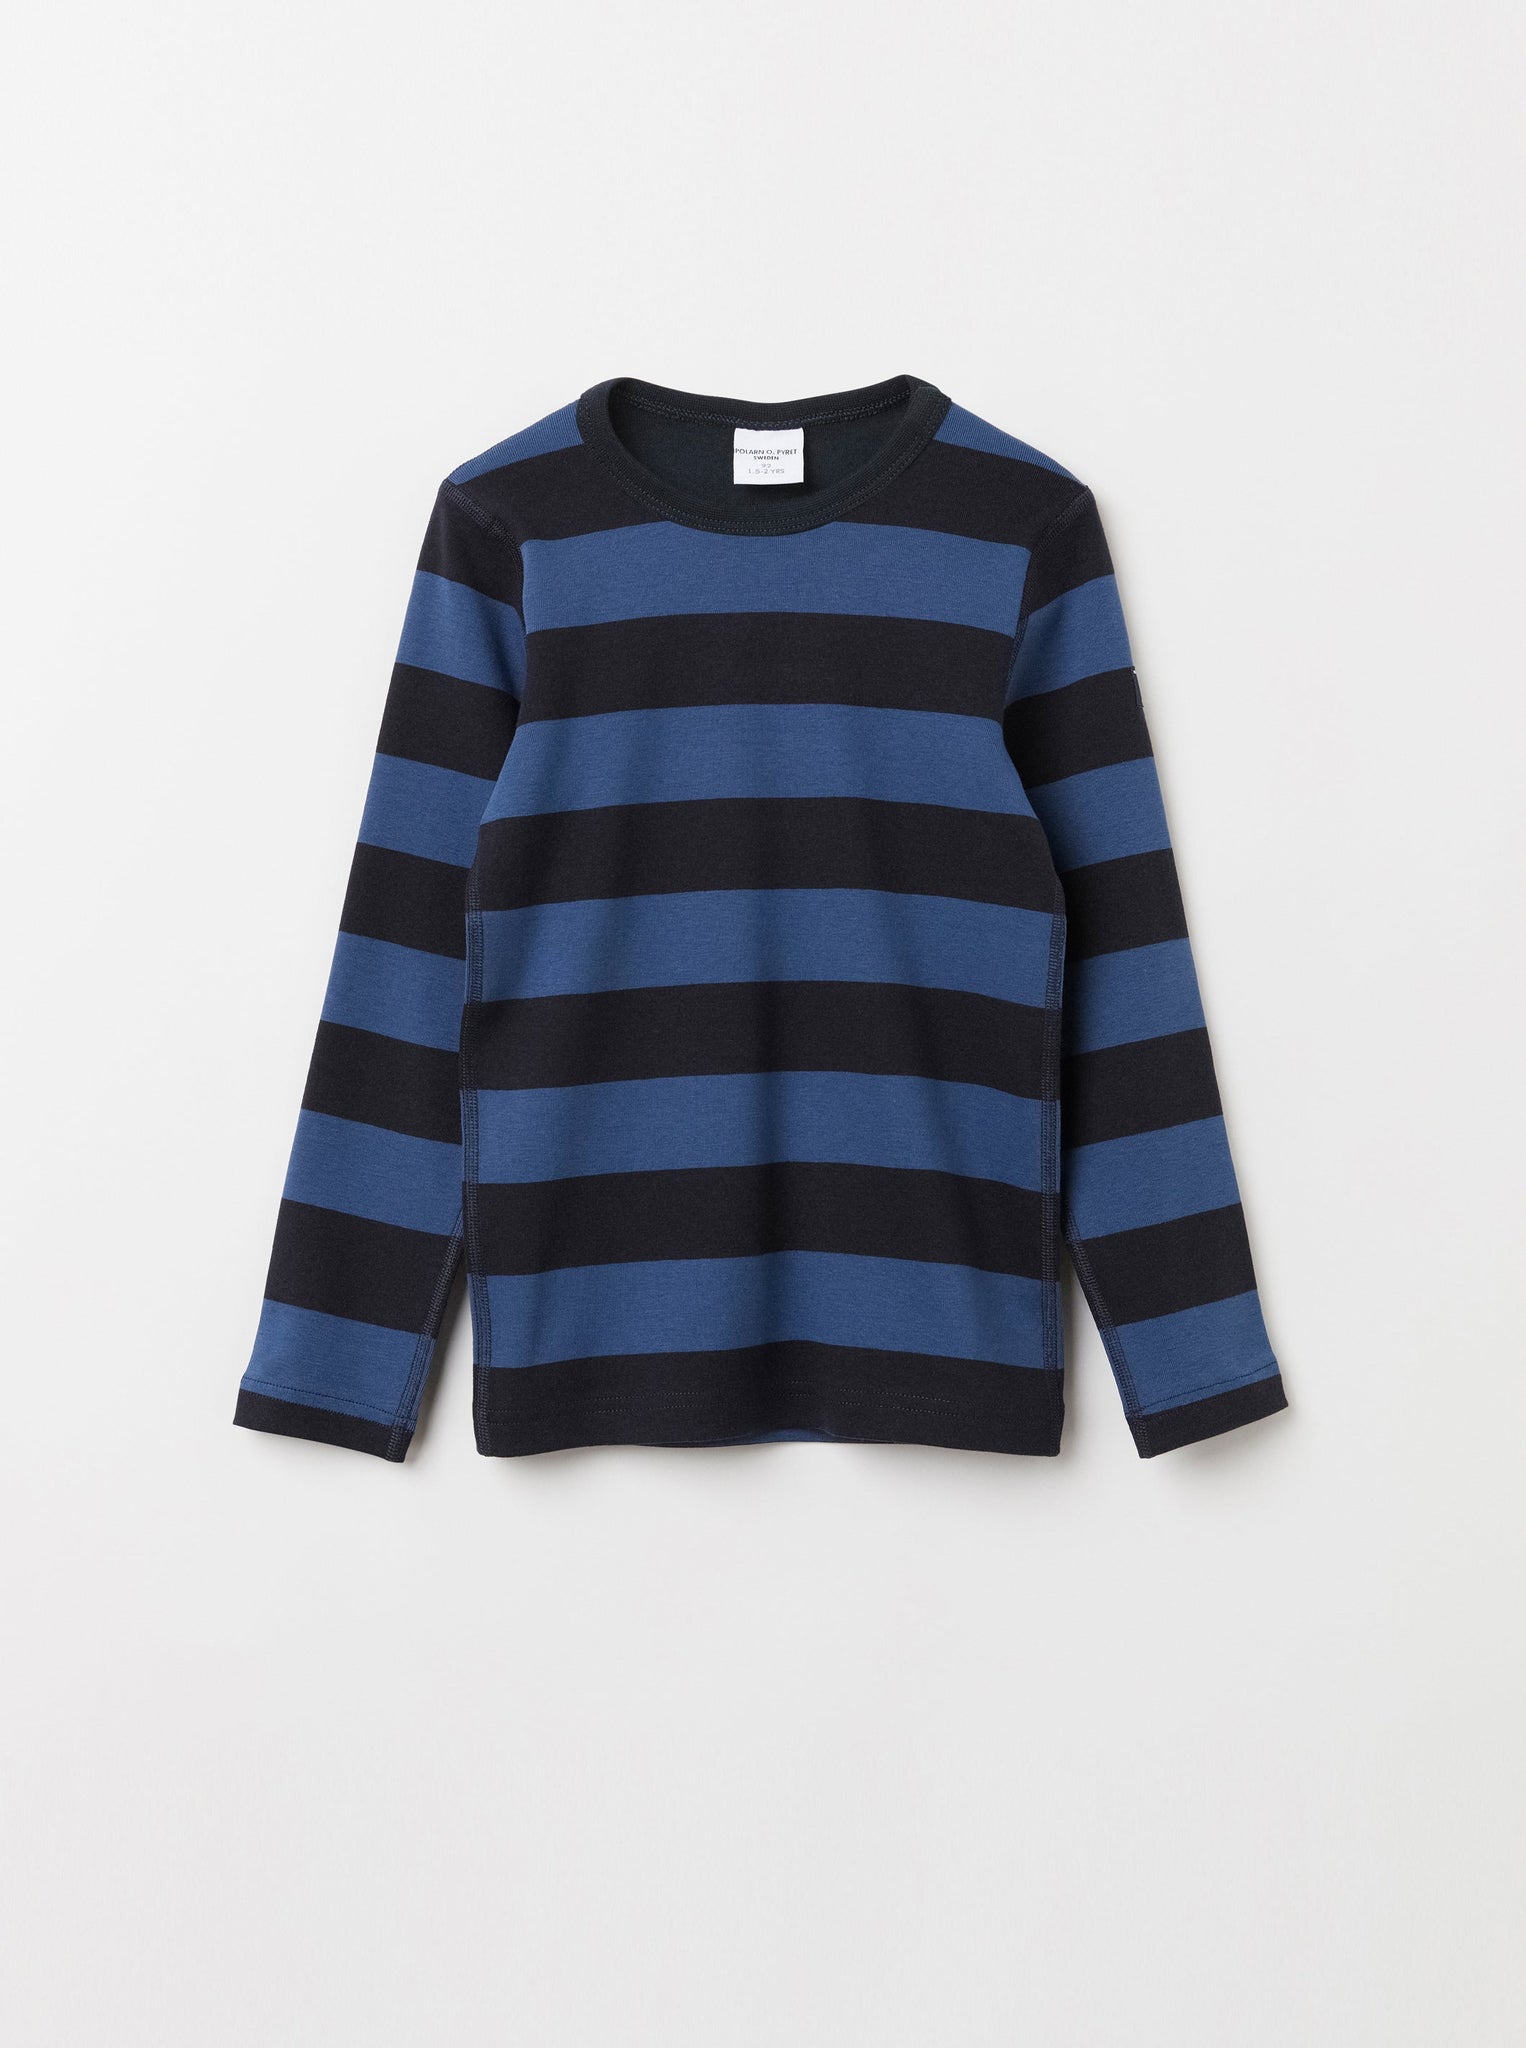 Organic Cotton Striped Blue Kids Top from the Polarn O. Pyret Kidswear collection. The best ethical kids clothes